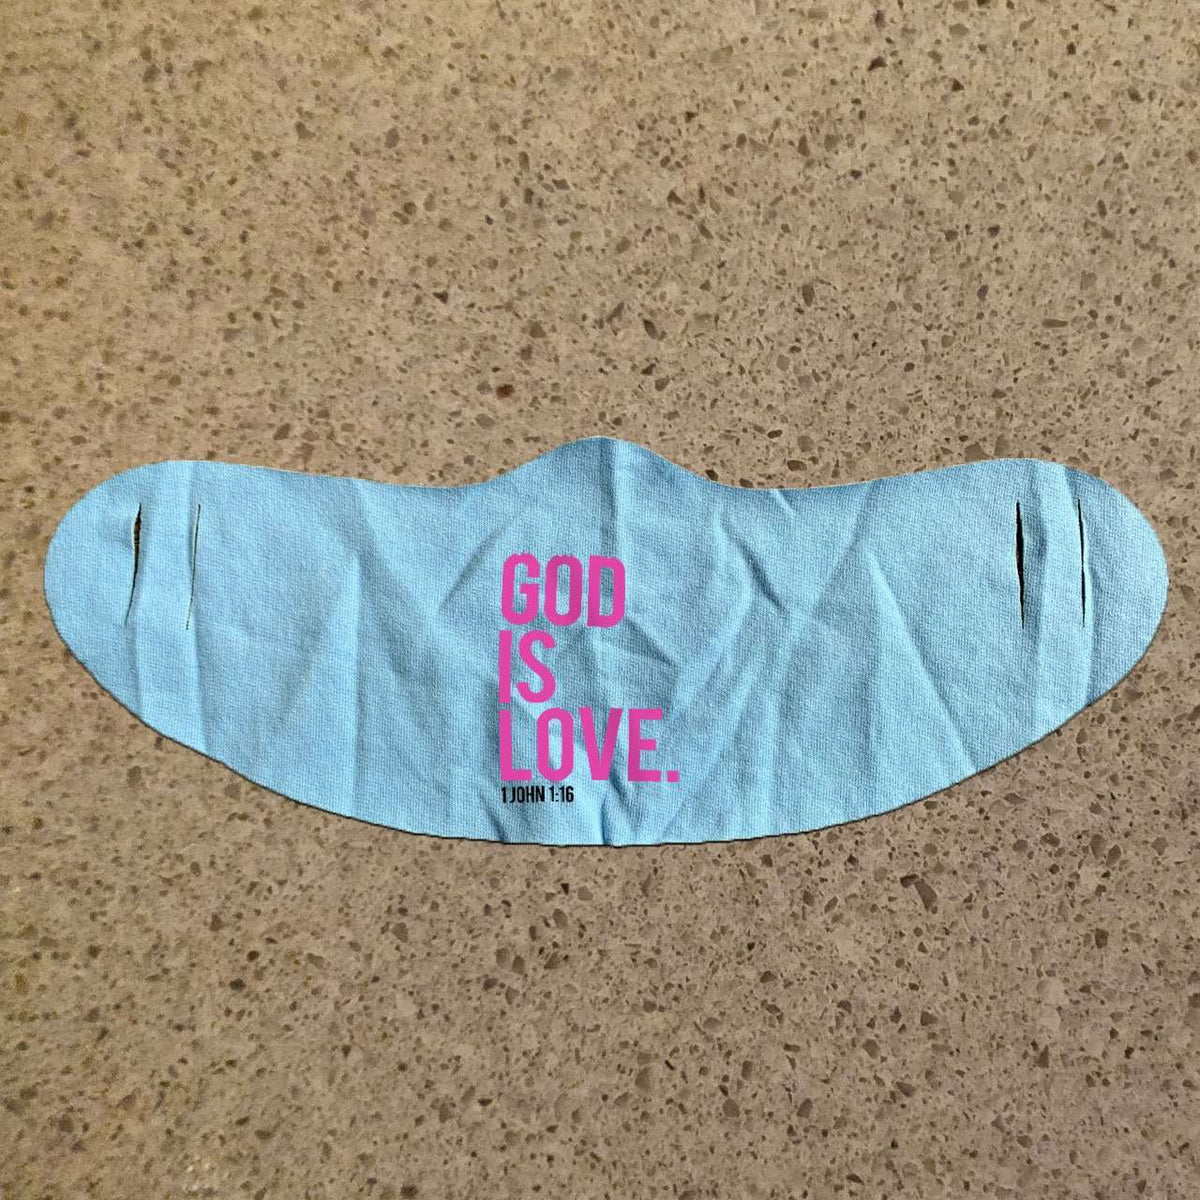 Designs by MyUtopia Shout Out:God Is Love 1 John 1:16 Fabric Face Covering / Face Mask,Light Blue,Fabric Face Mask